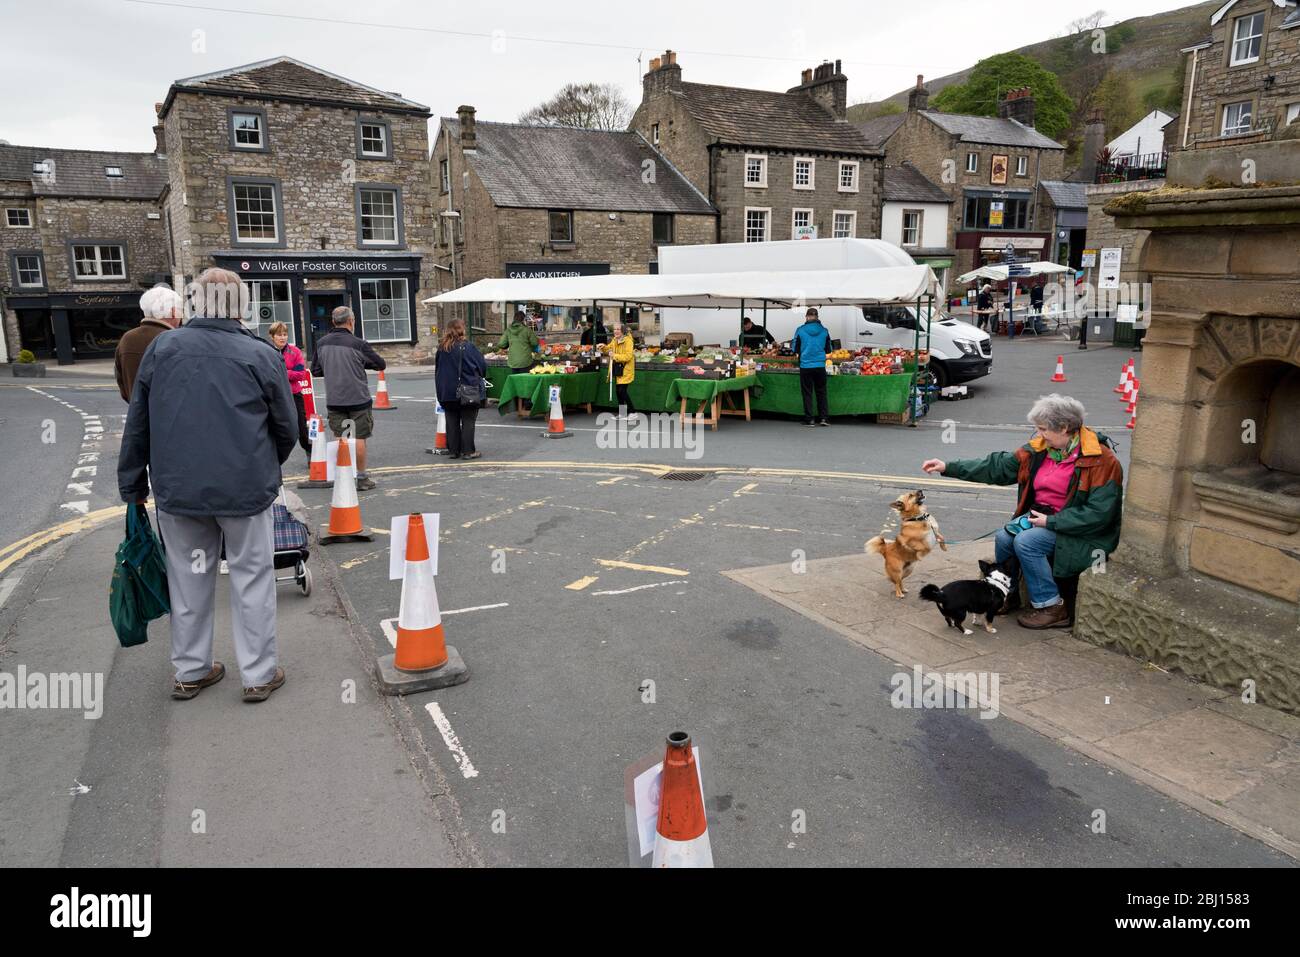 Settle, North Yorkshire, UK. 28th Apr 2020. Covid-19 social distancing queues at the stalls at the weekly street market, in the Yorkshire Dales town of Settle. Credit: John Bentley/Alamy Live News Stock Photo